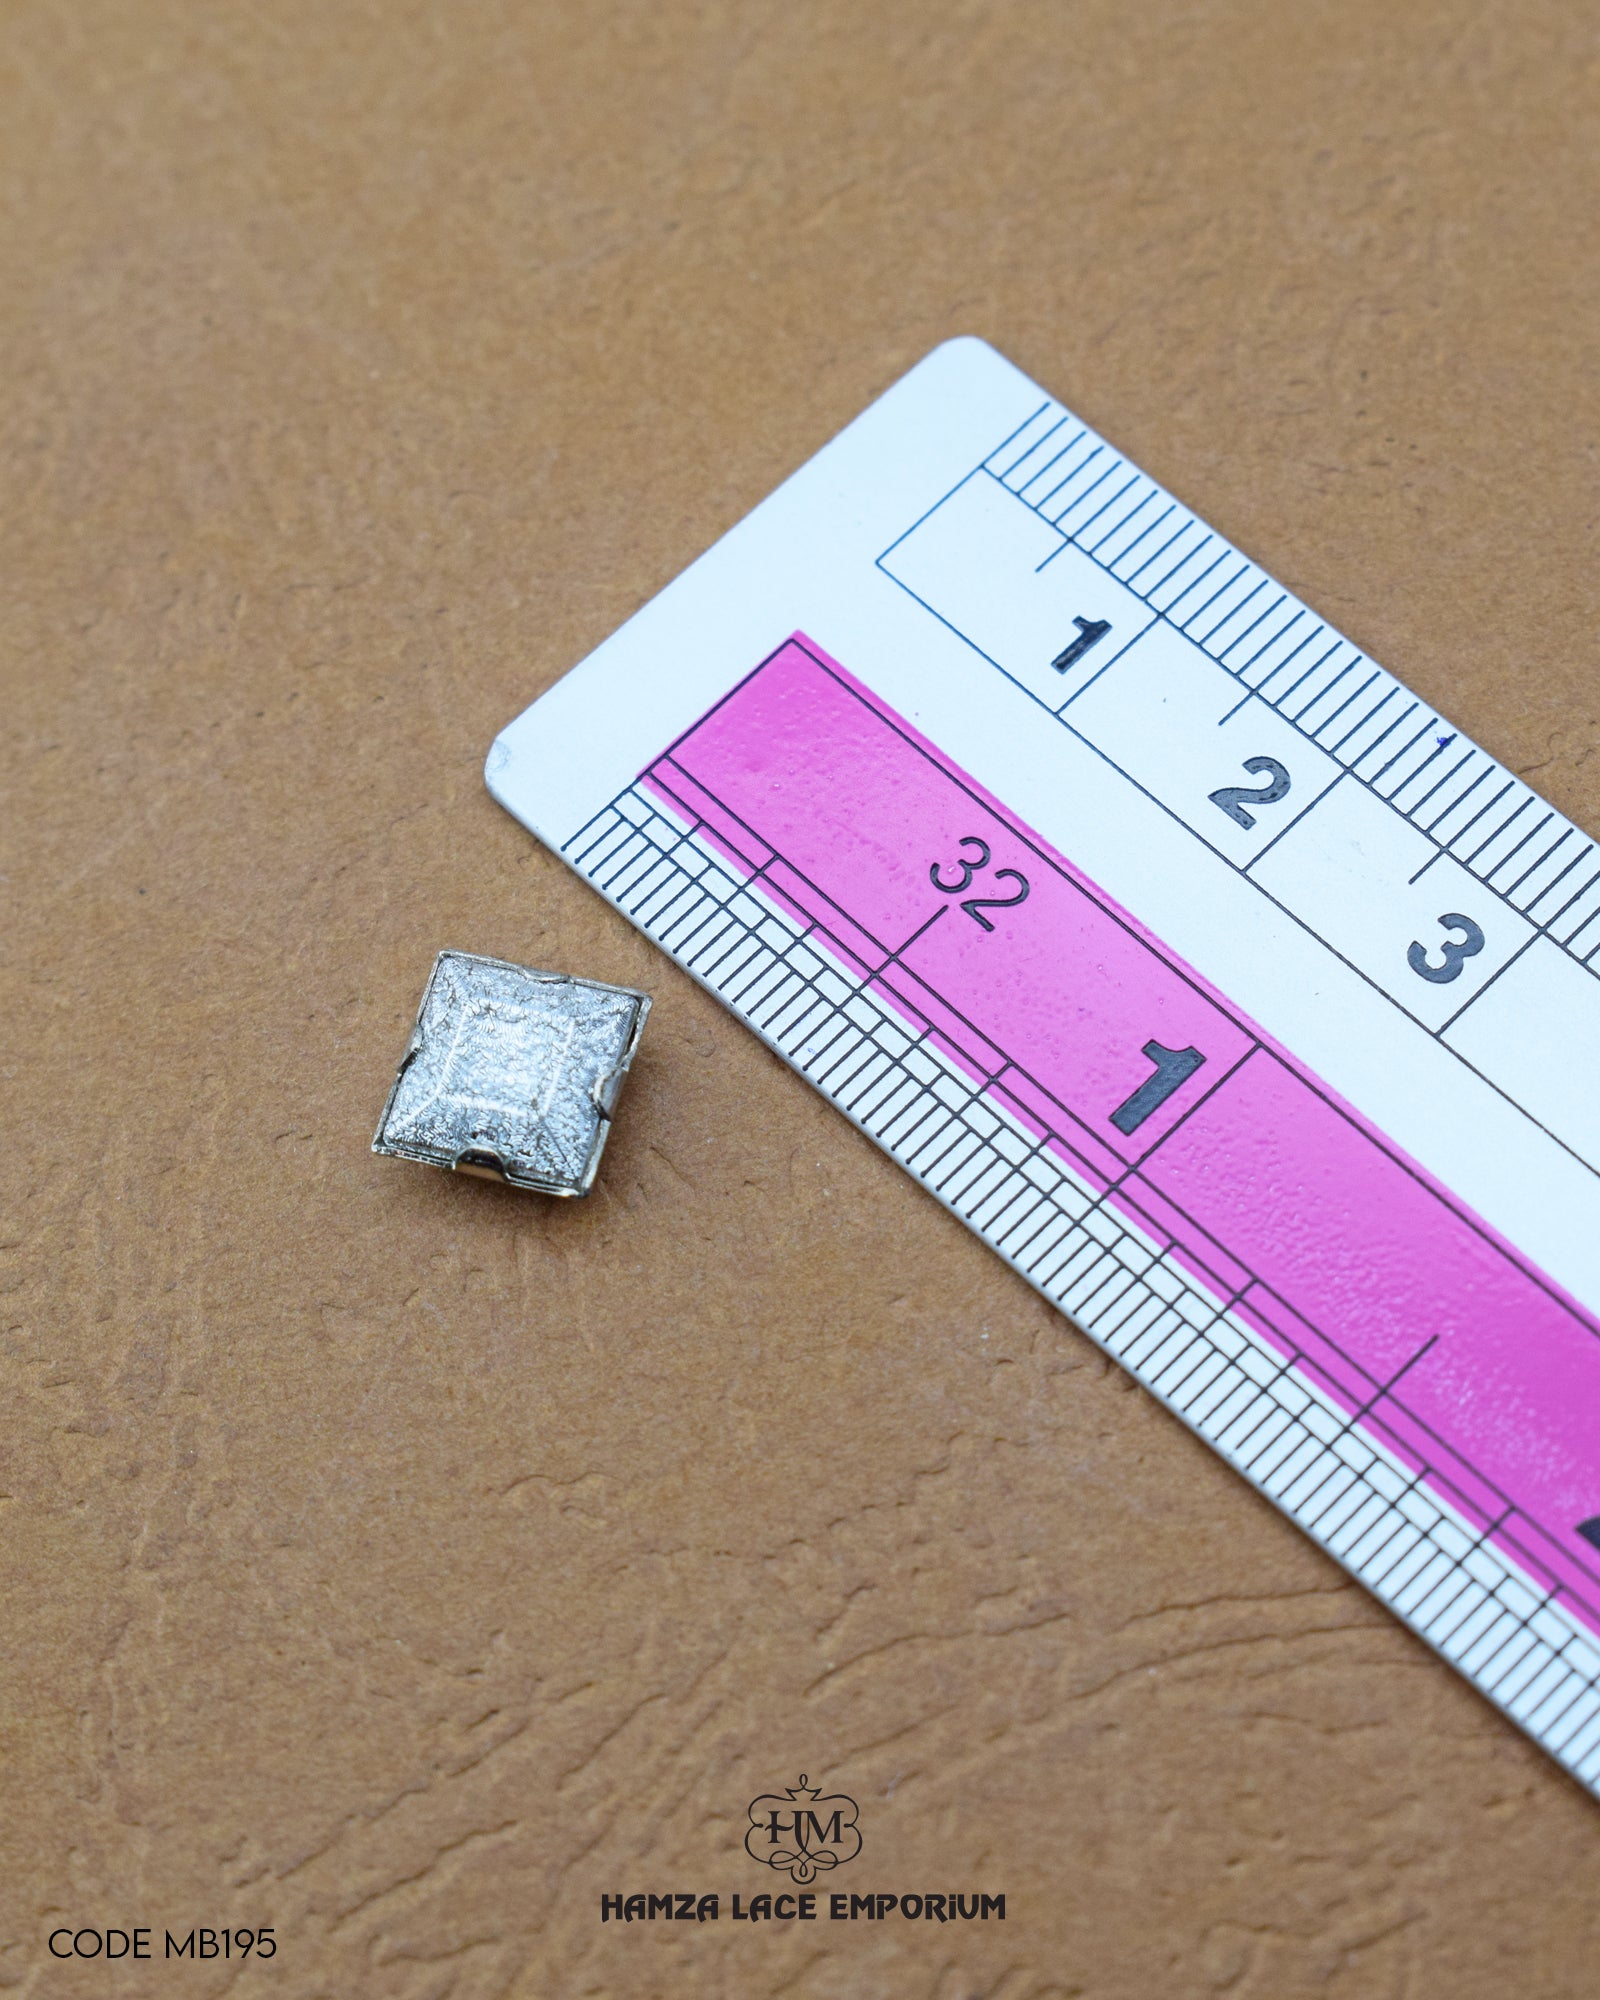 Size of the 'Metal Button MB195' is given with the help of a ruler